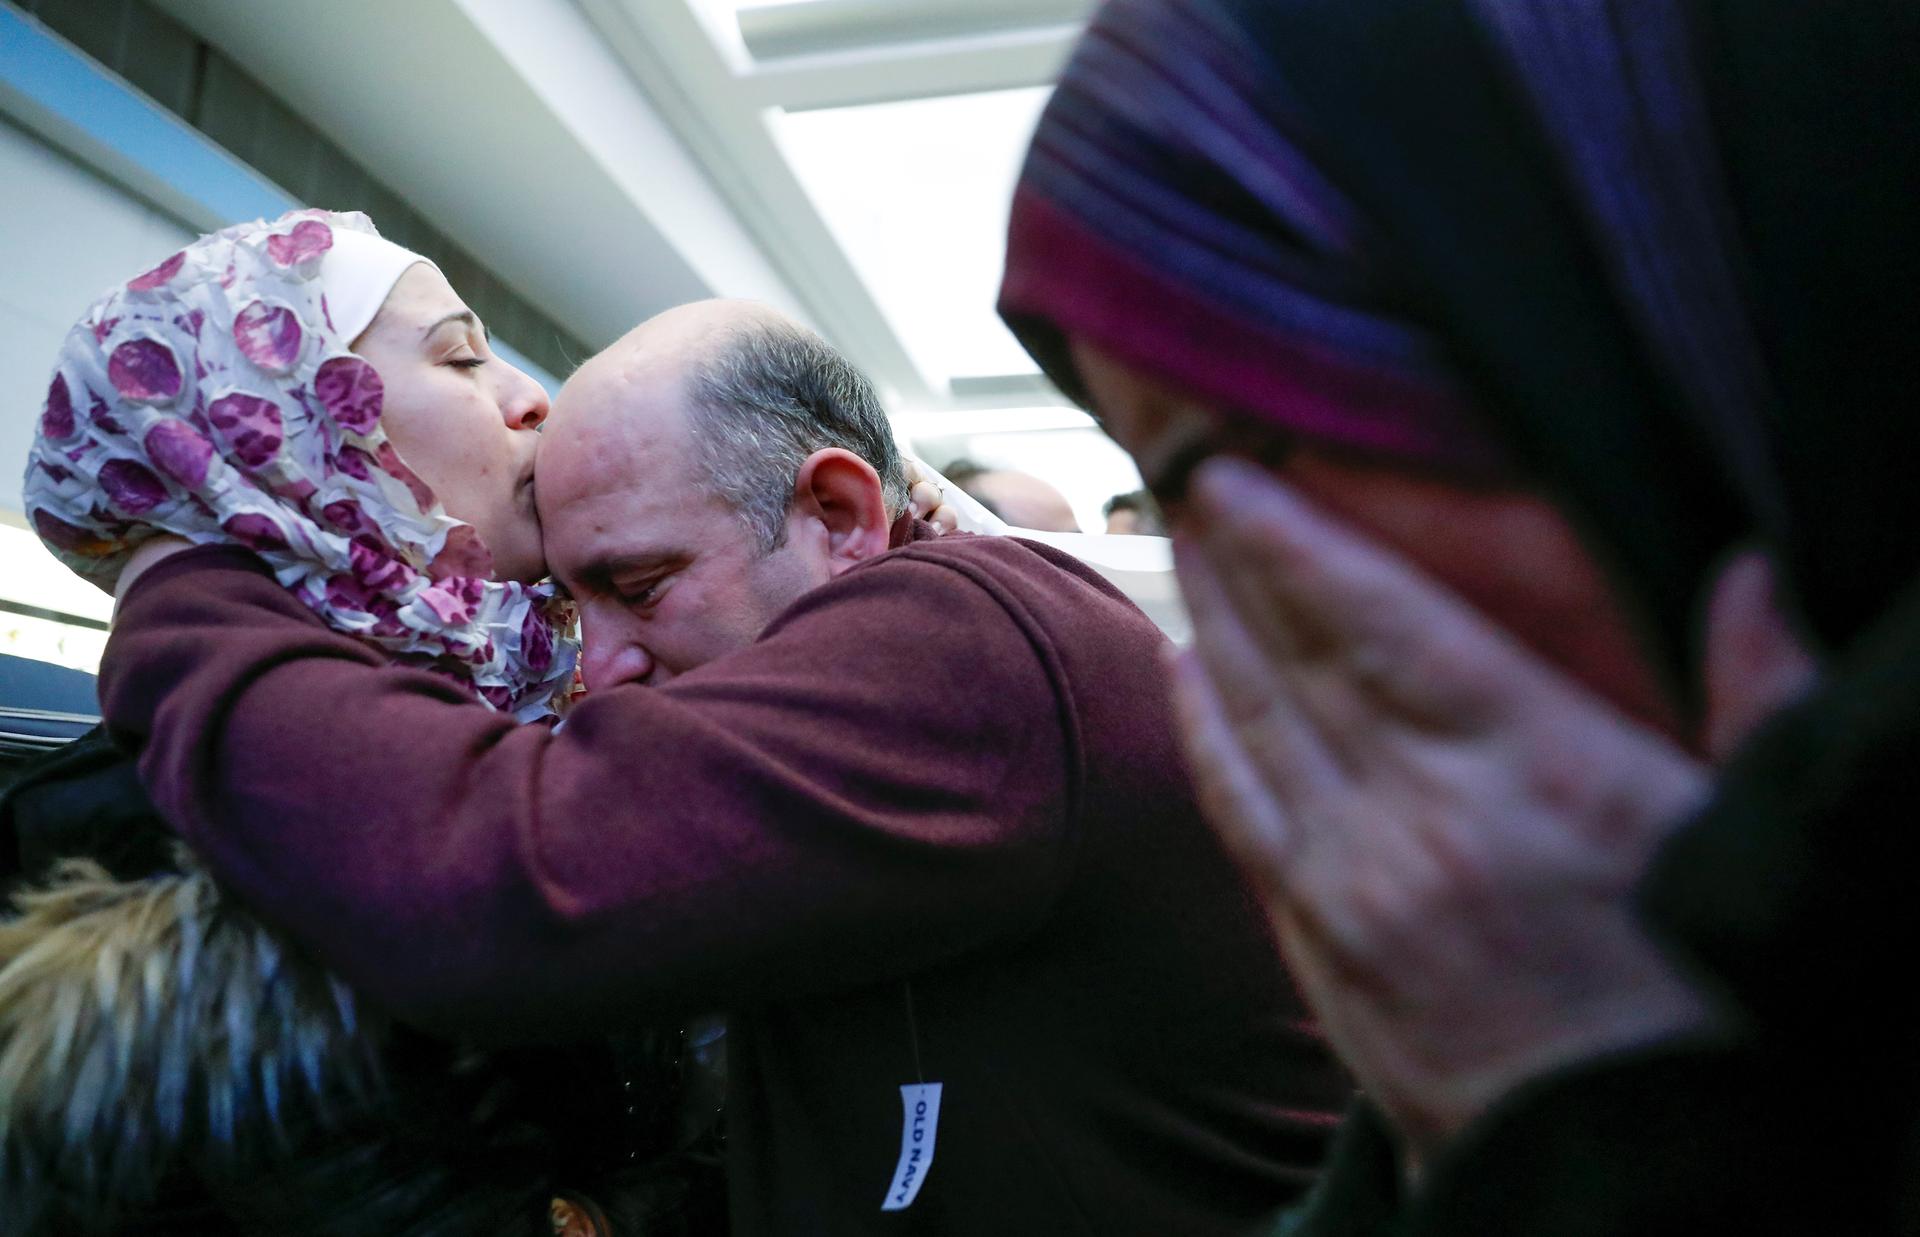 Syrian refugees embrace after landing at Chicago's O'Hare airport.